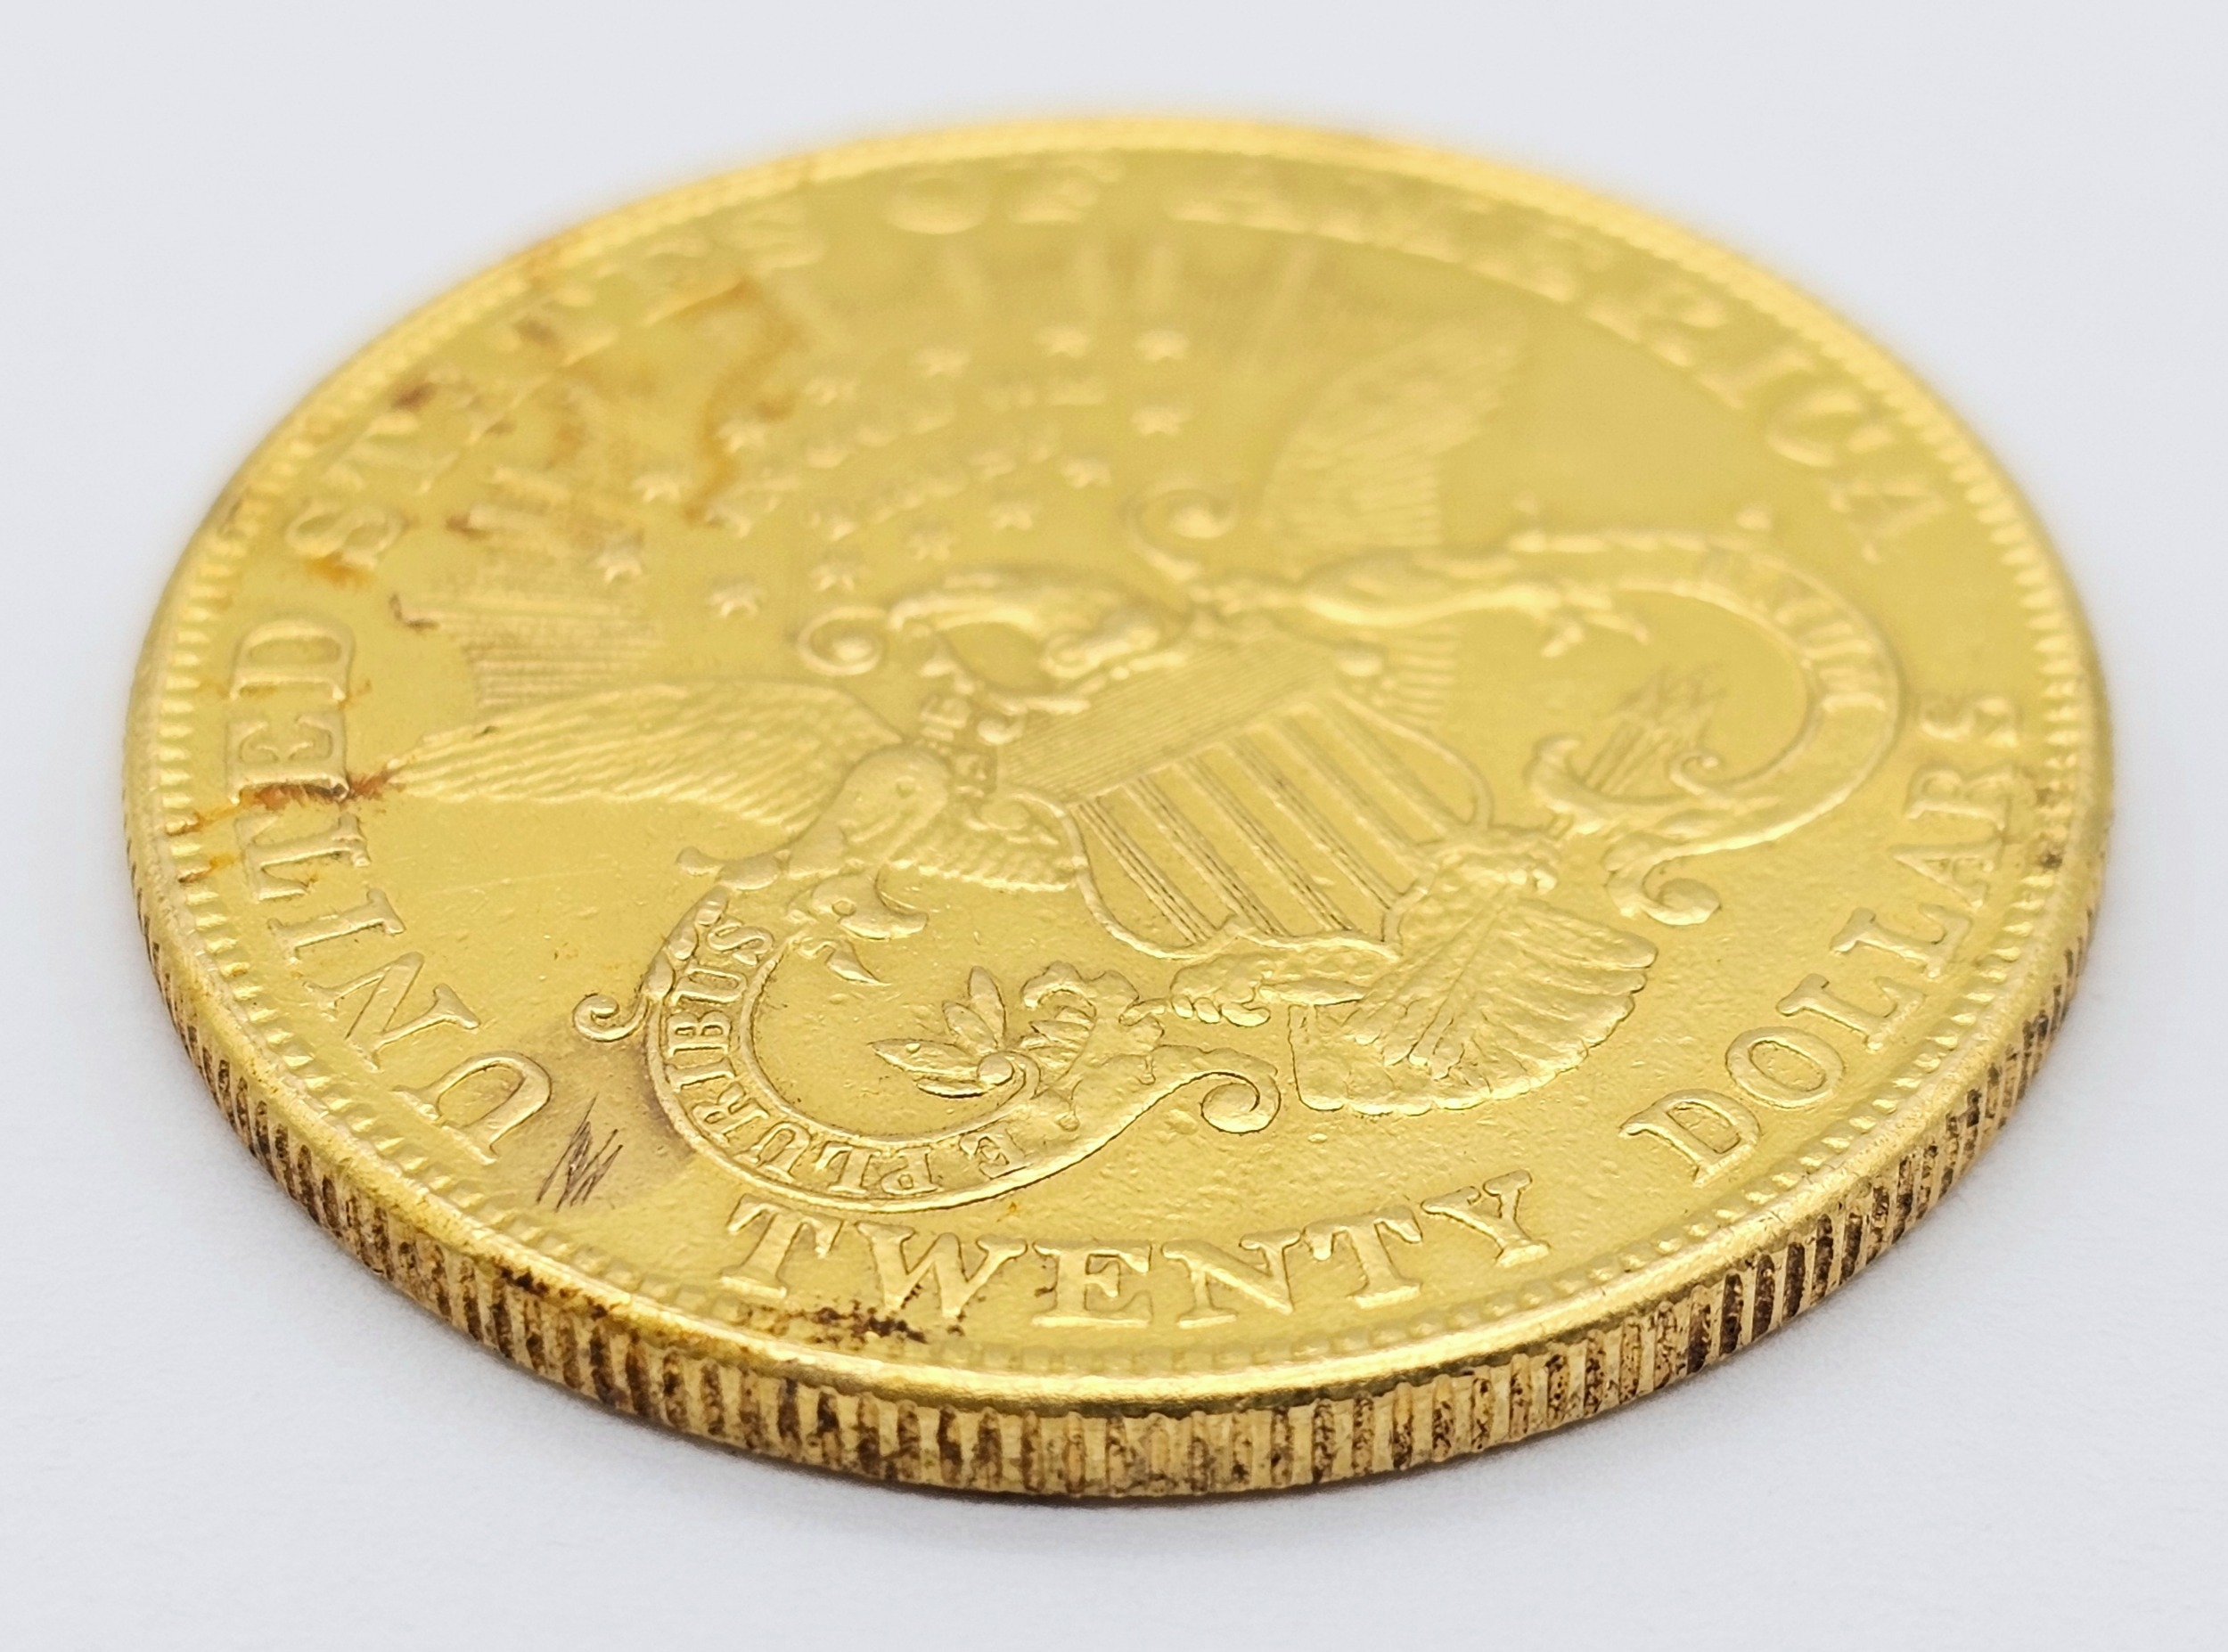 A $20 GOLD LIBERTY COIN DATED 1907 AND WEIGHING 33.43gms THIS COIN IS IN VERY GOOD CONDITION - Image 6 of 8